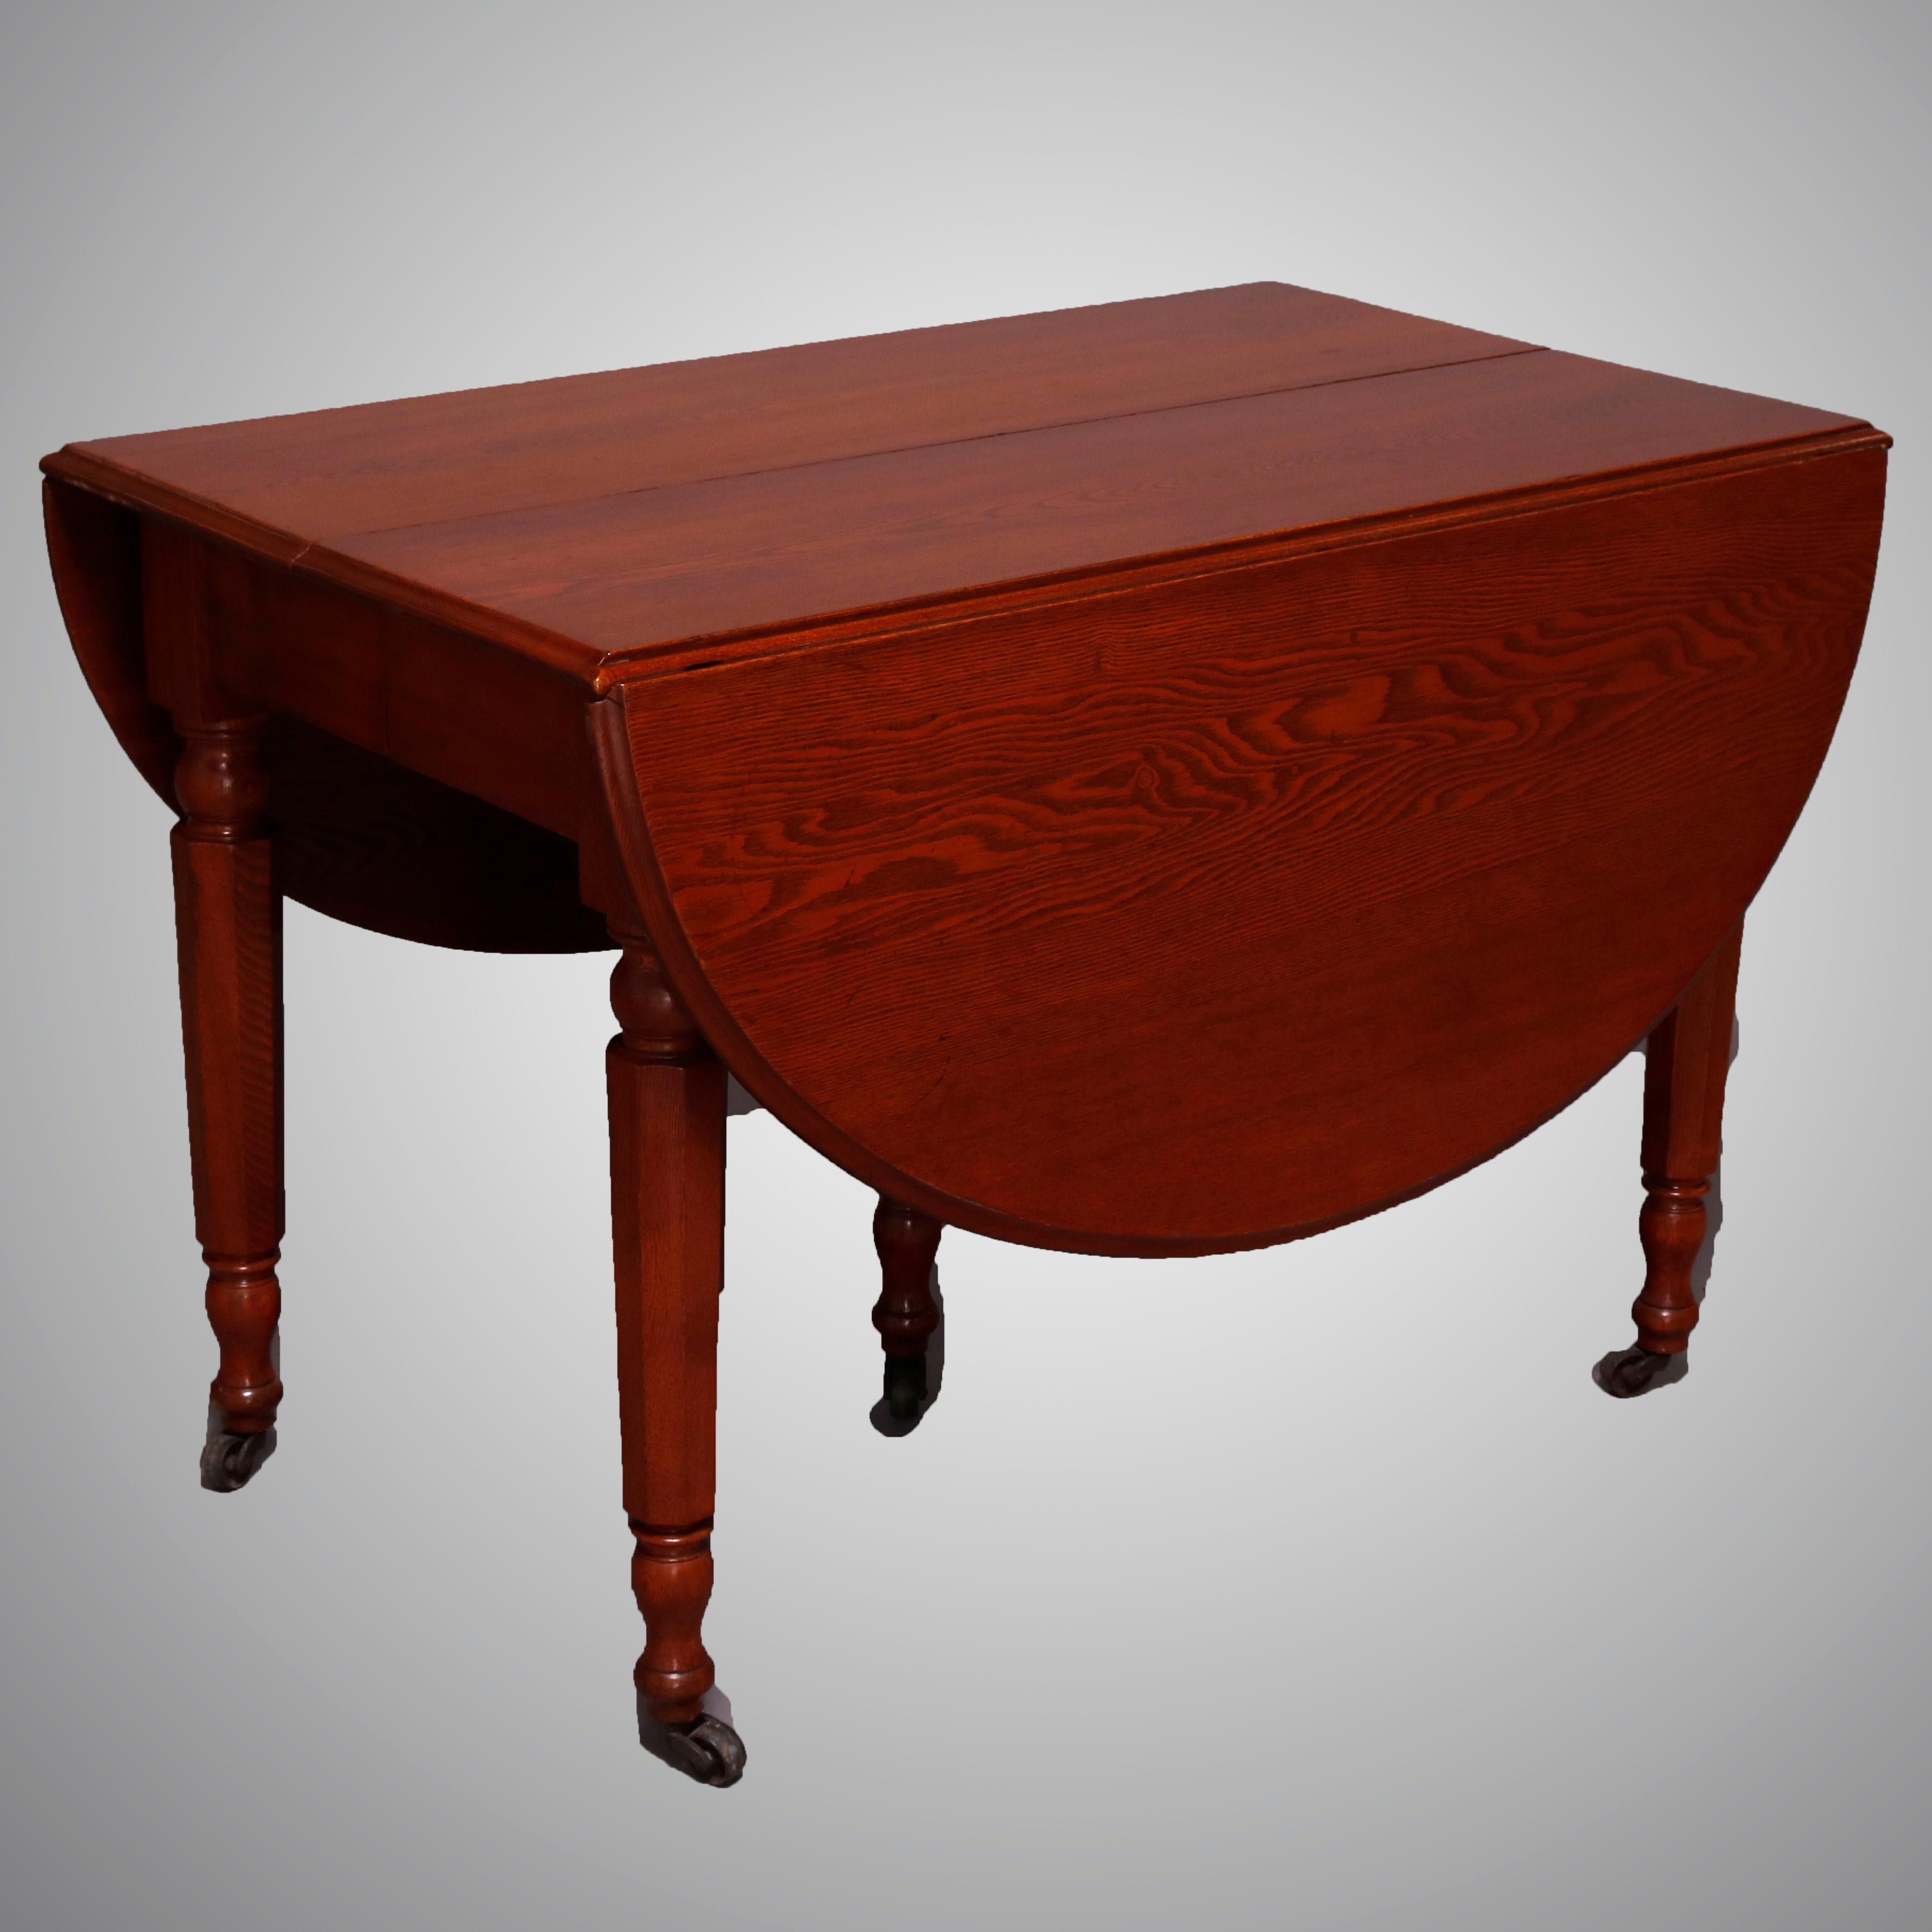 Sheraton Chestnut Drop Leaf Banquet Dining Table with 5 Leaves, circa 1910 9